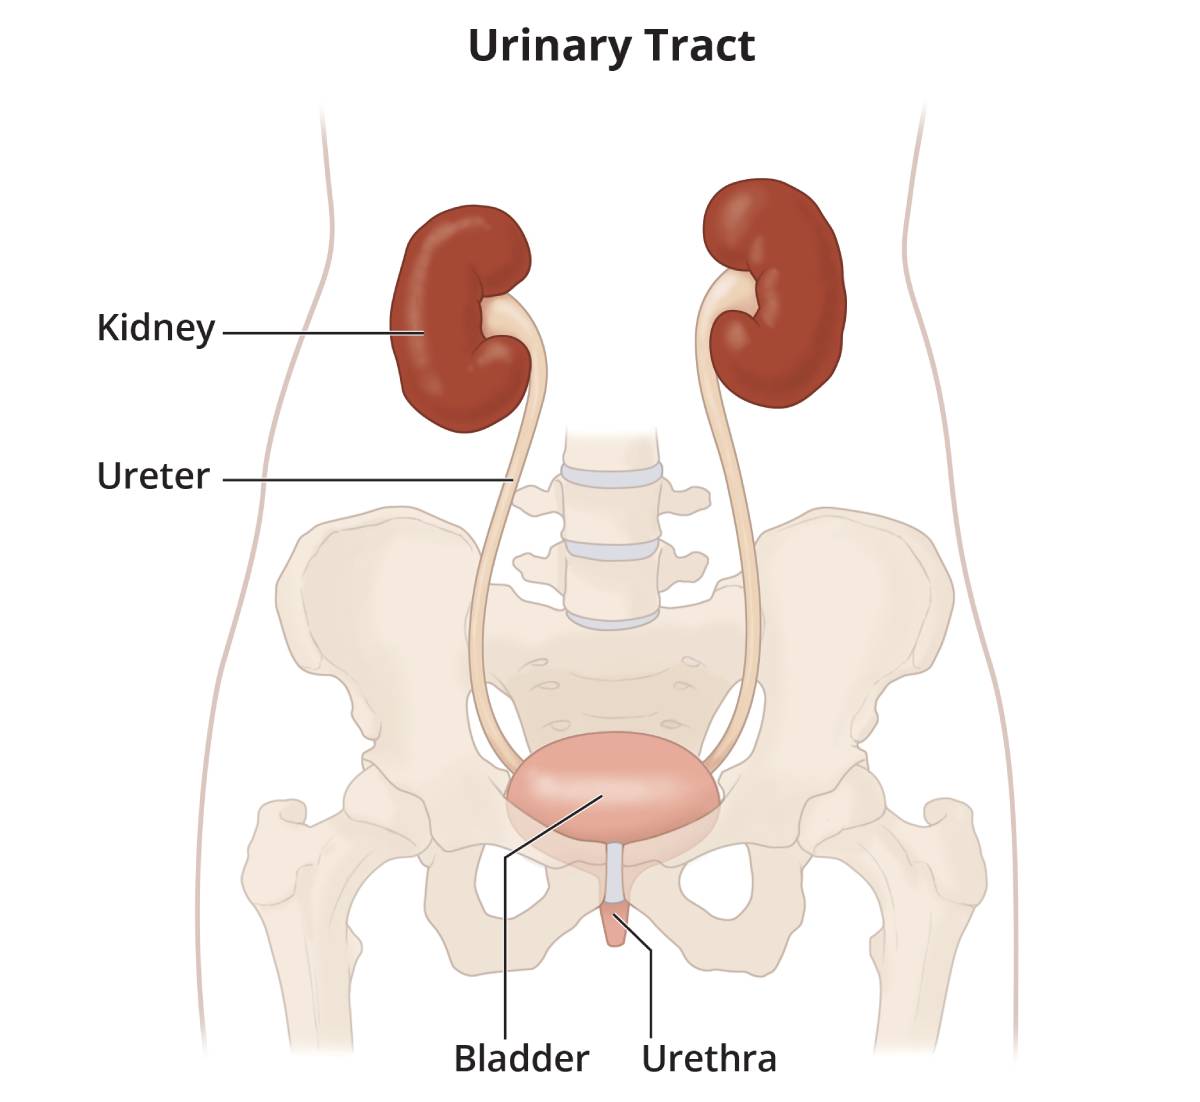 Purple urinary bag syndrome: what every primary healthcare provider should  know | BMJ Case Reports